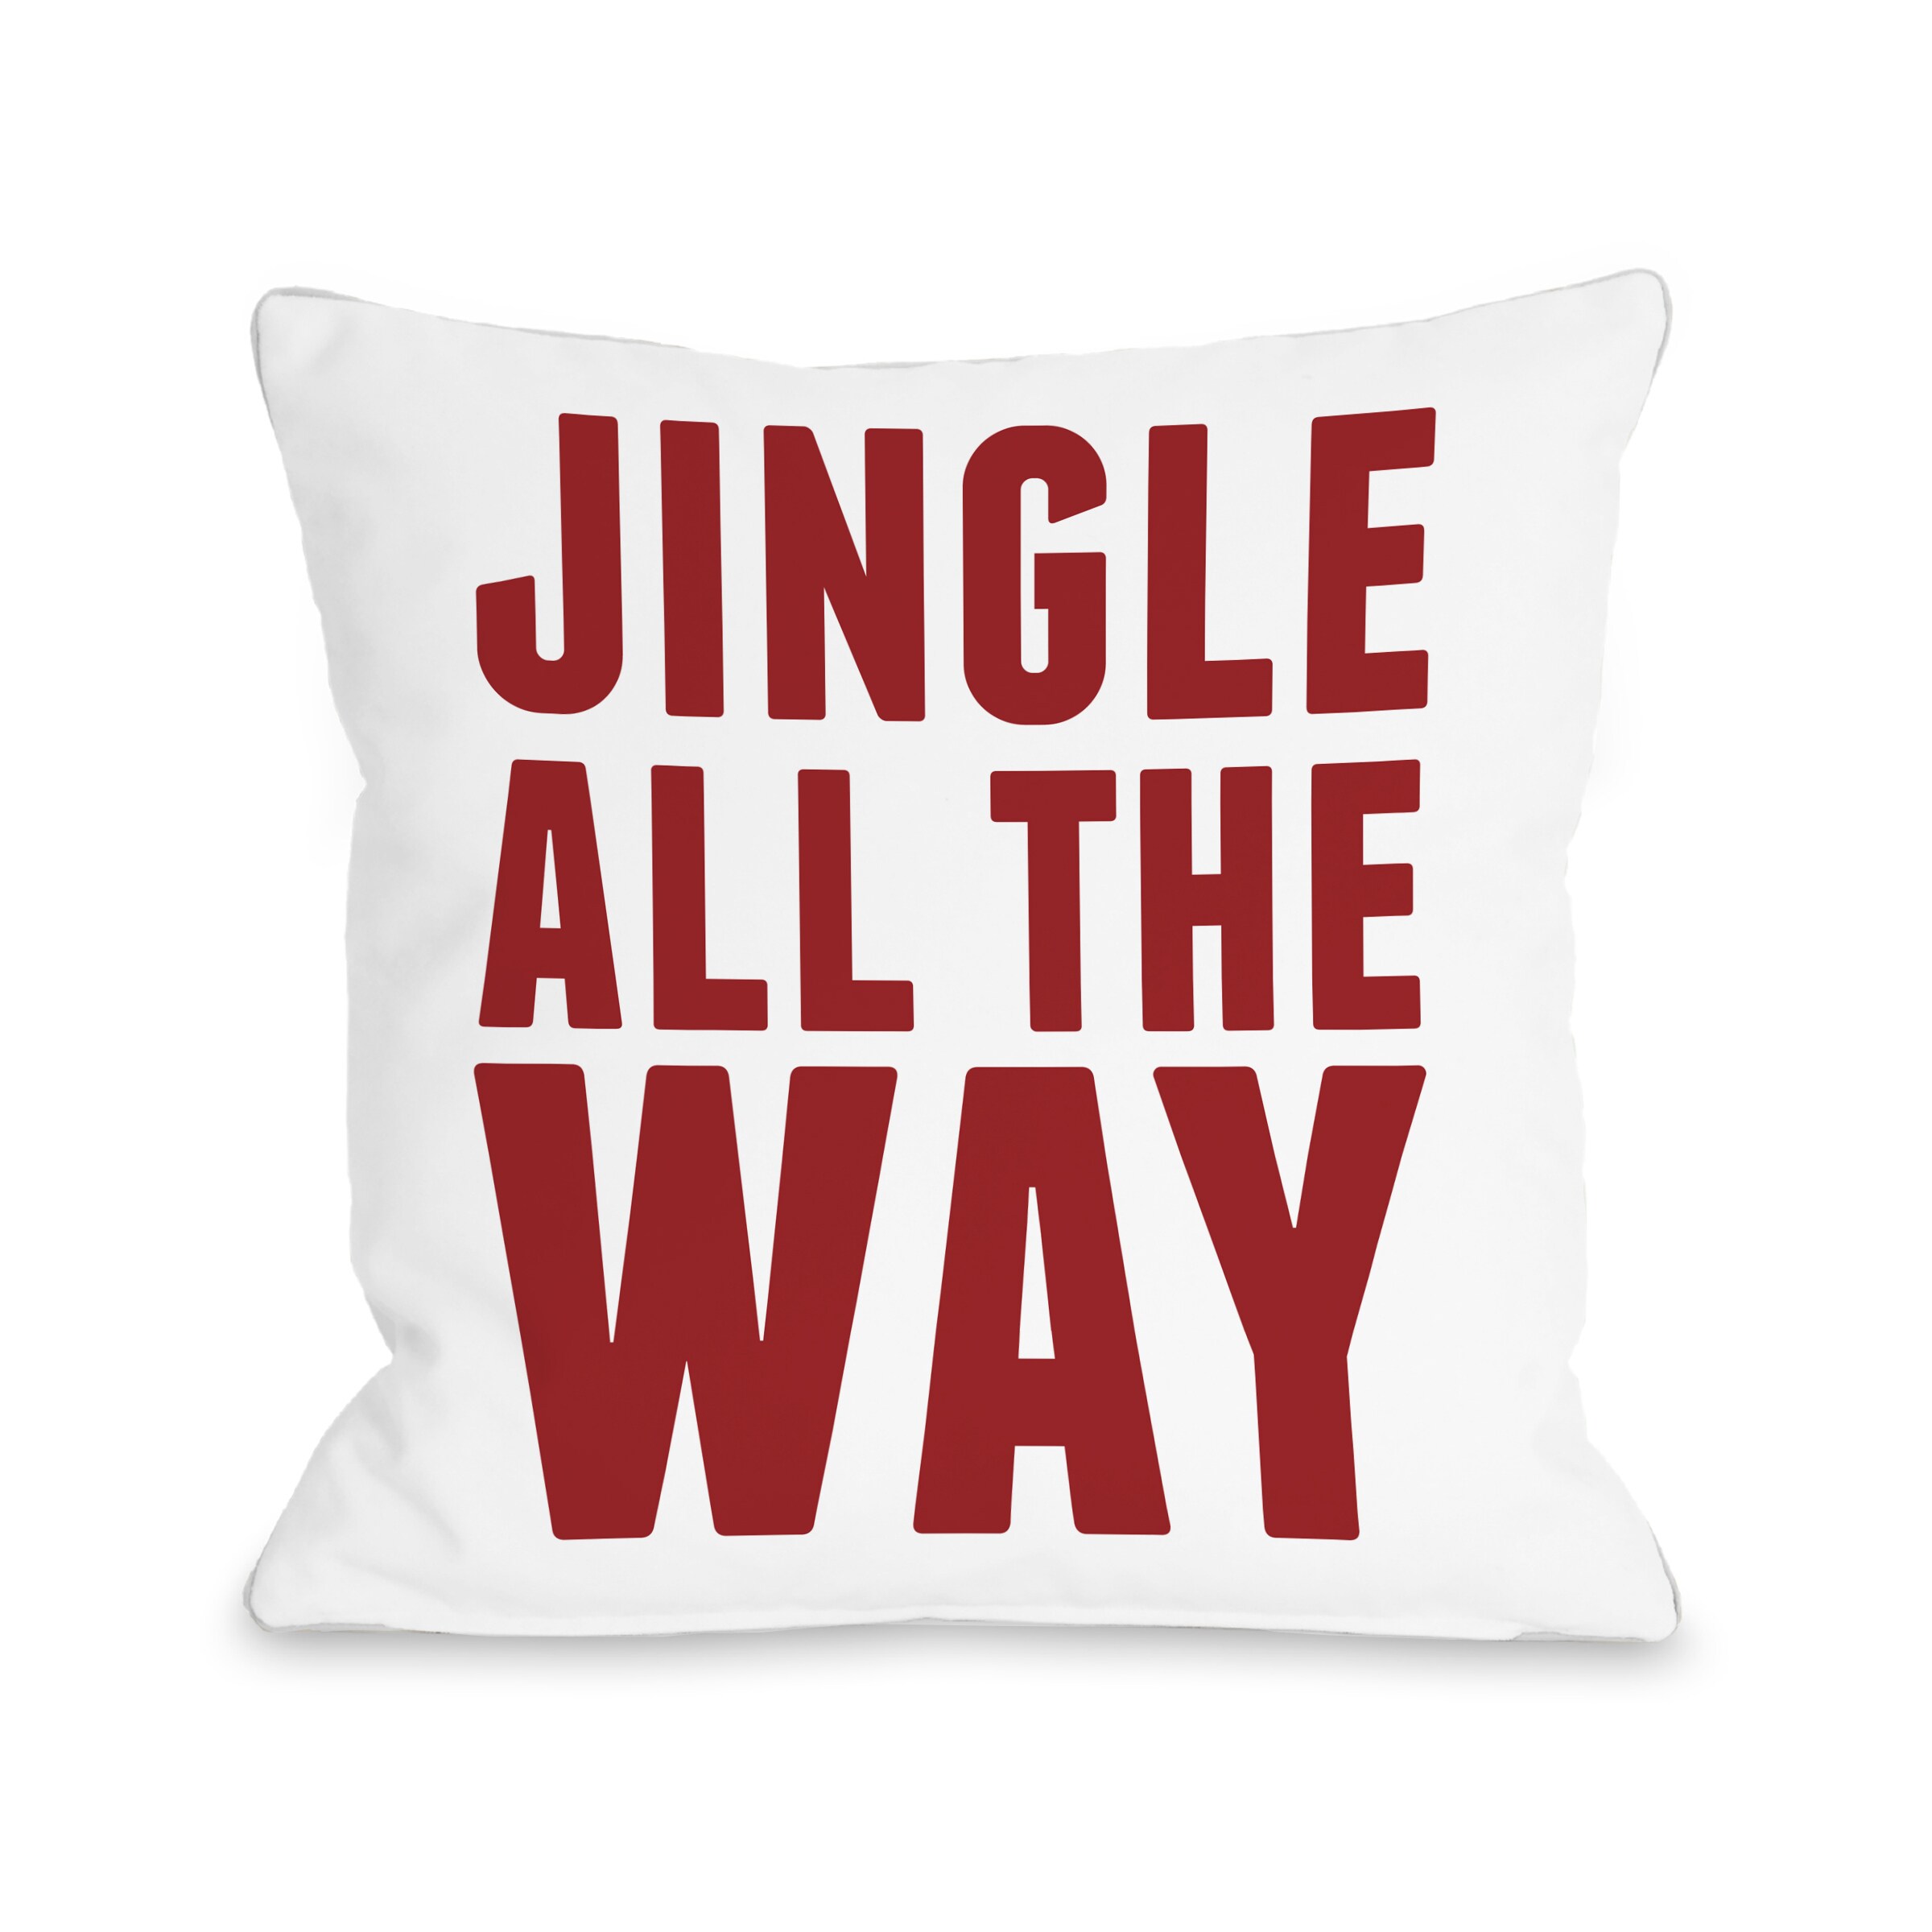 https://ak1.ostkcdn.com/images/products/18007578/Bold-Jingle-All-The-Way-Red-Throw-16-or-18-Inch-Throw-Pillow-by-OBC-84ee6cc6-5066-4774-bb9d-962e41feed48.jpg